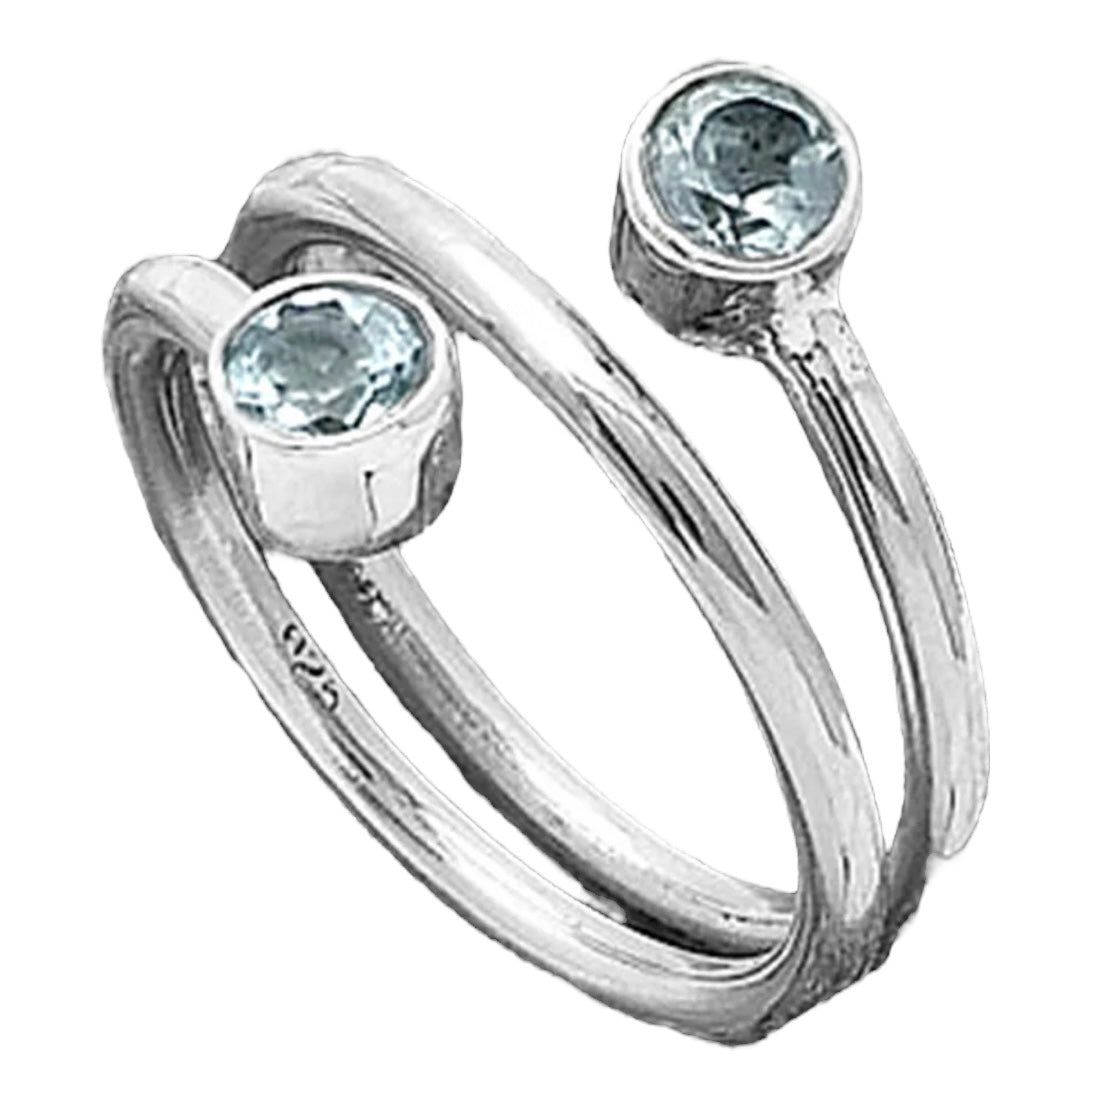 Blue Topaz Two Stone Sterling Silver Wrap Ring - Keja Designs Jewelry